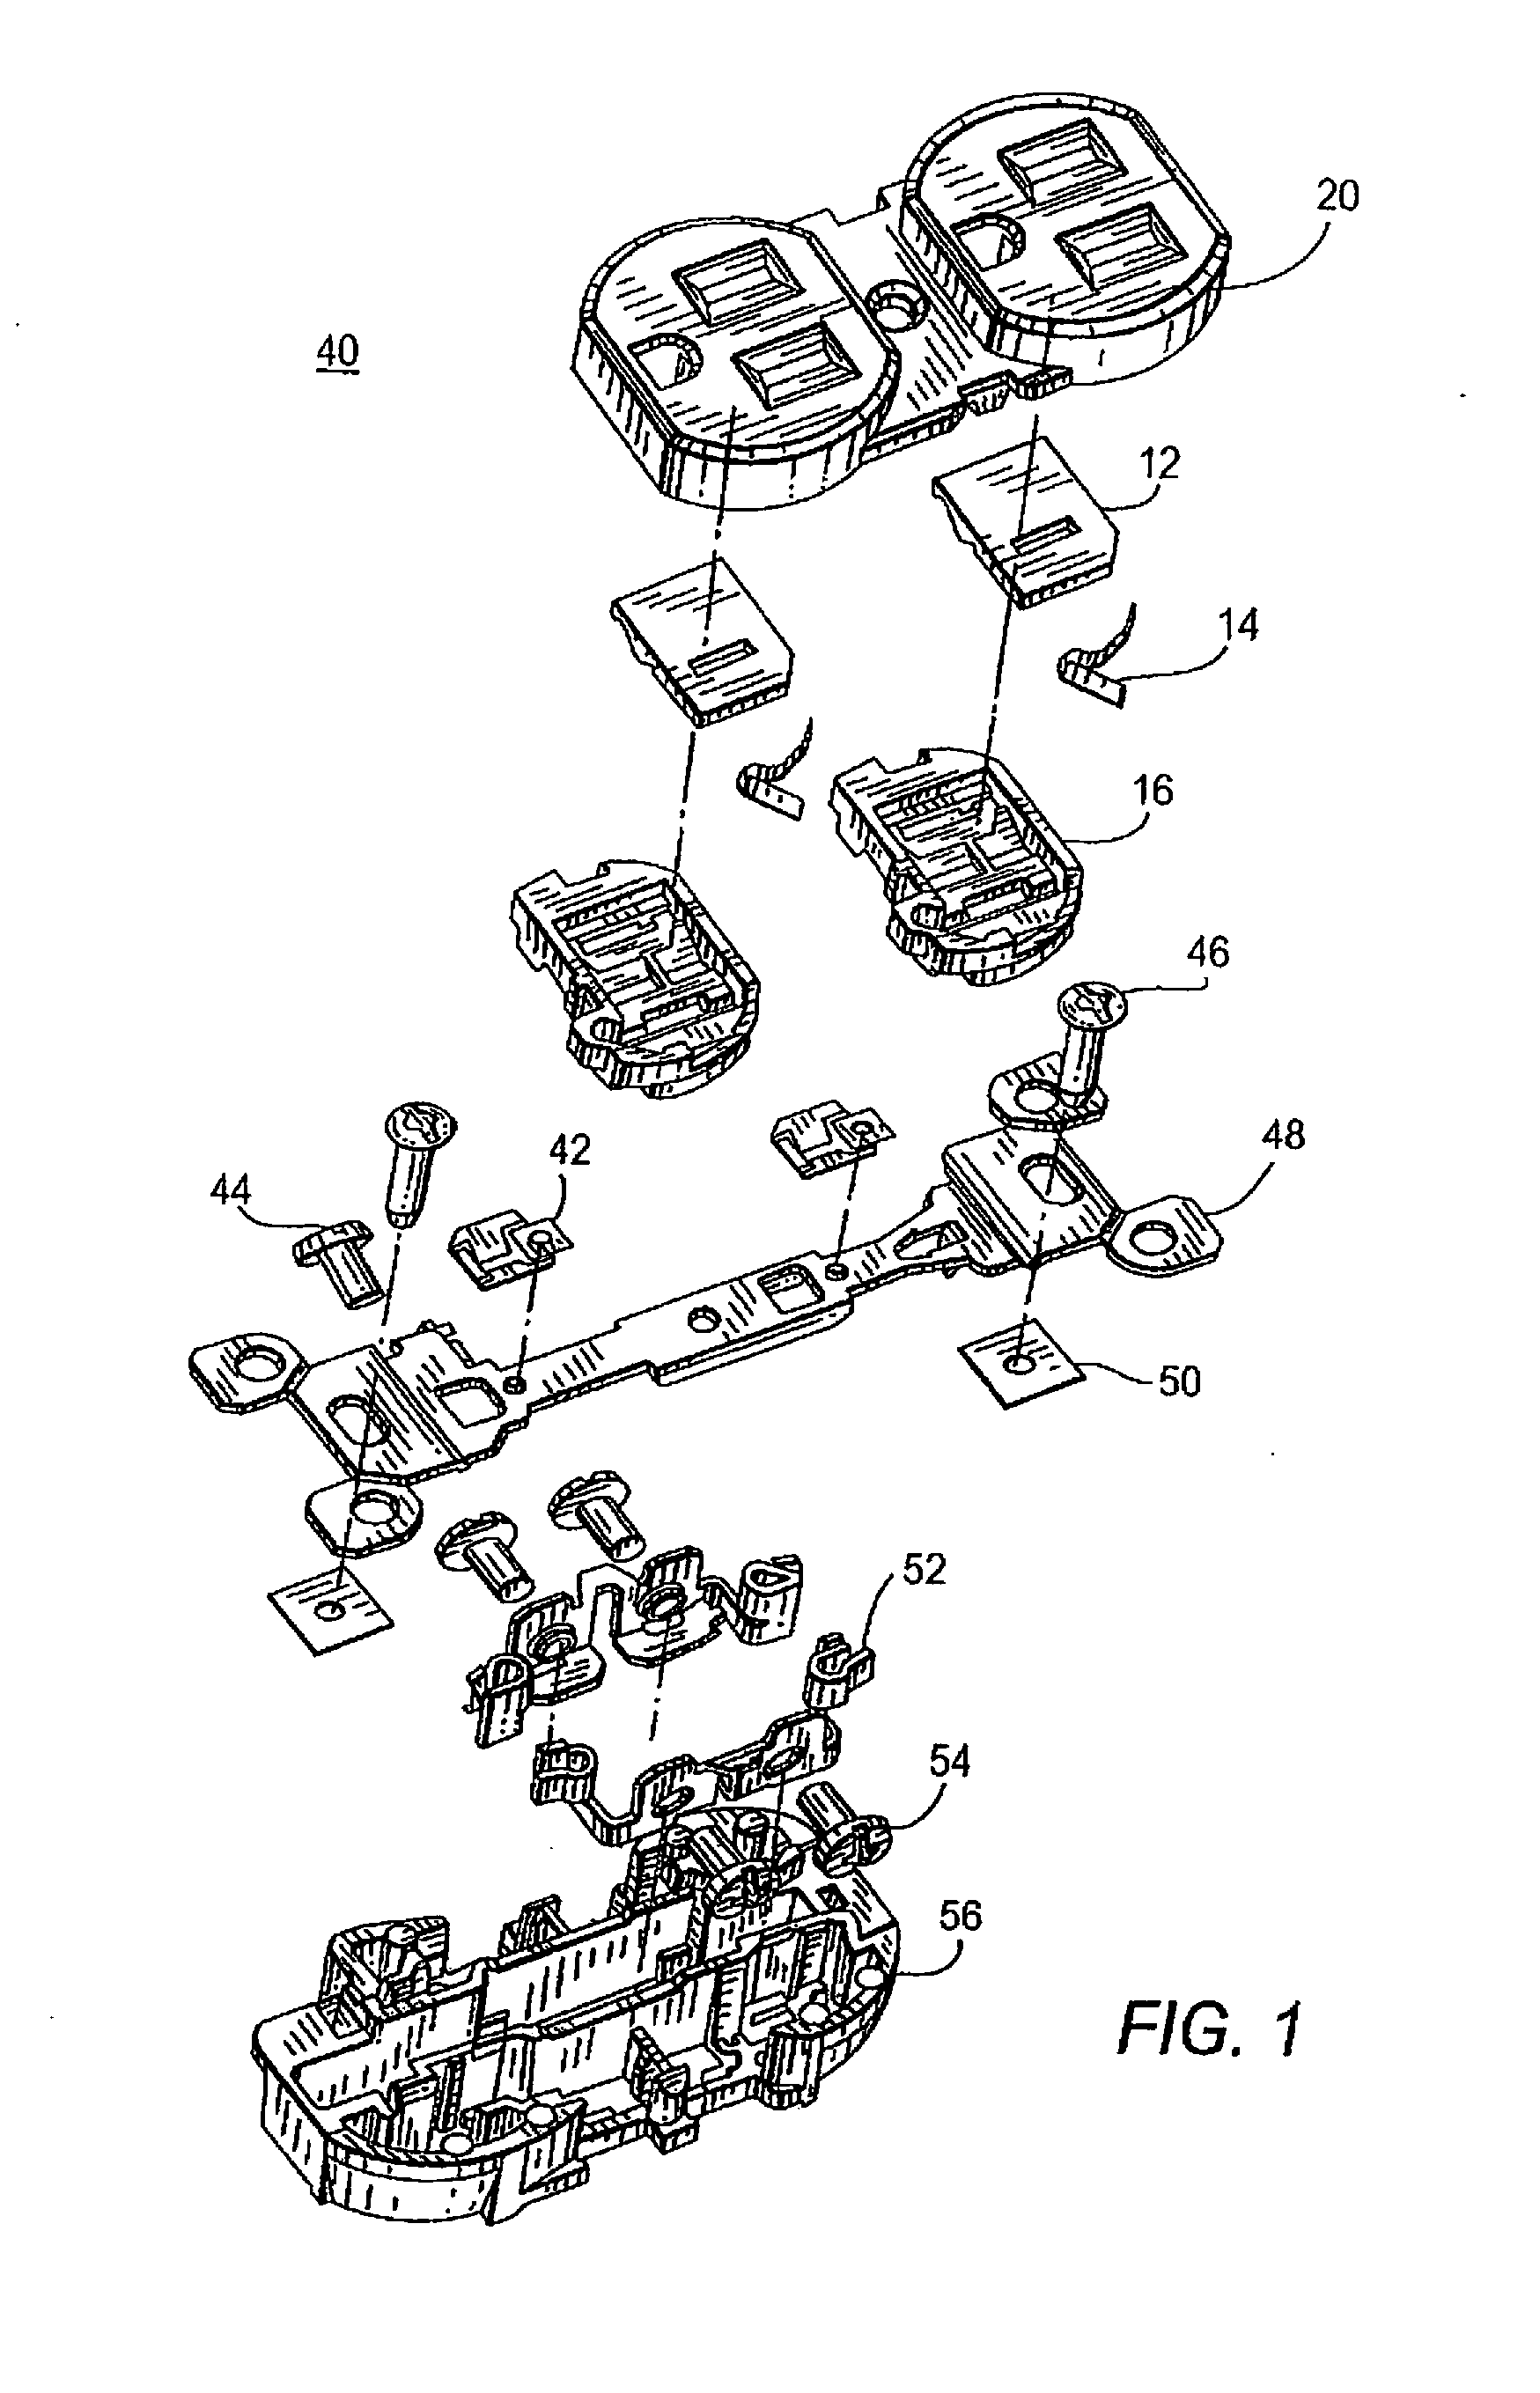 Tamper-resistant electrical wiring device system